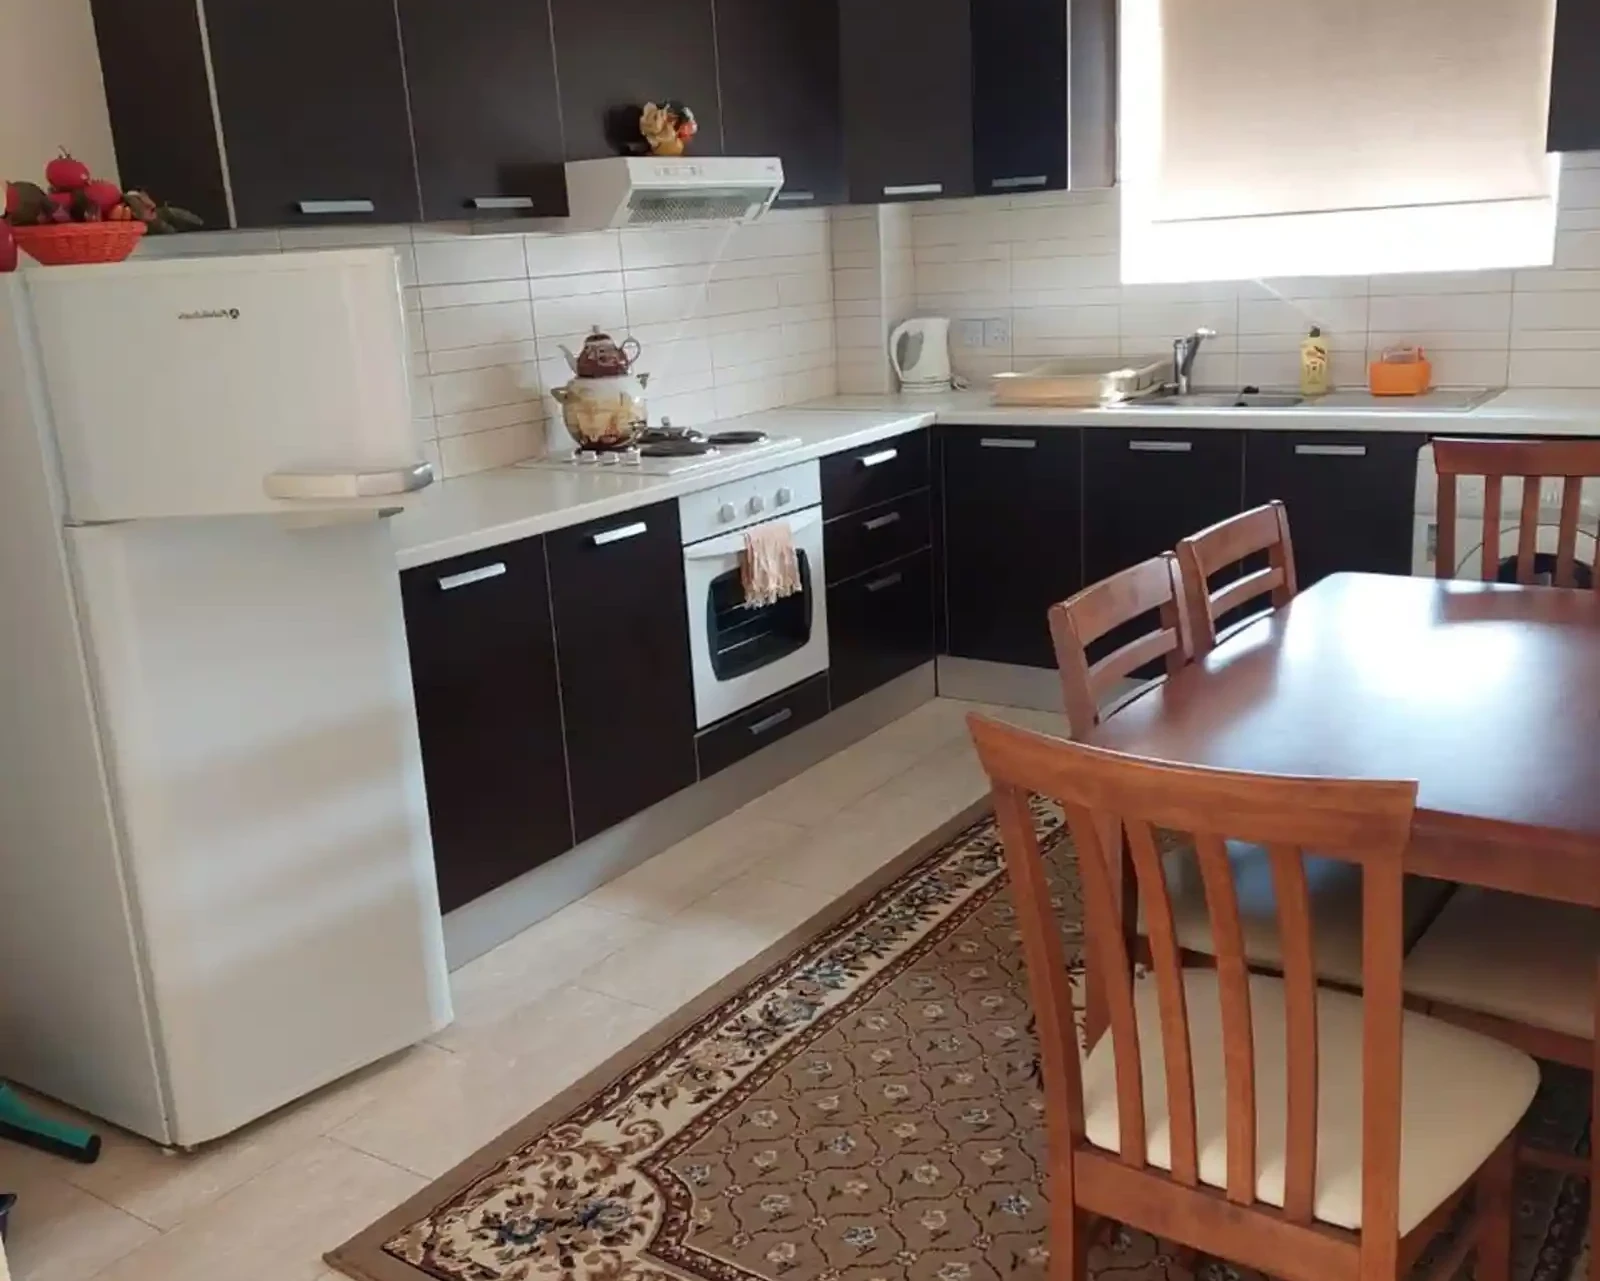 2-bedroom apartment fоr sаle €145.000, image 1